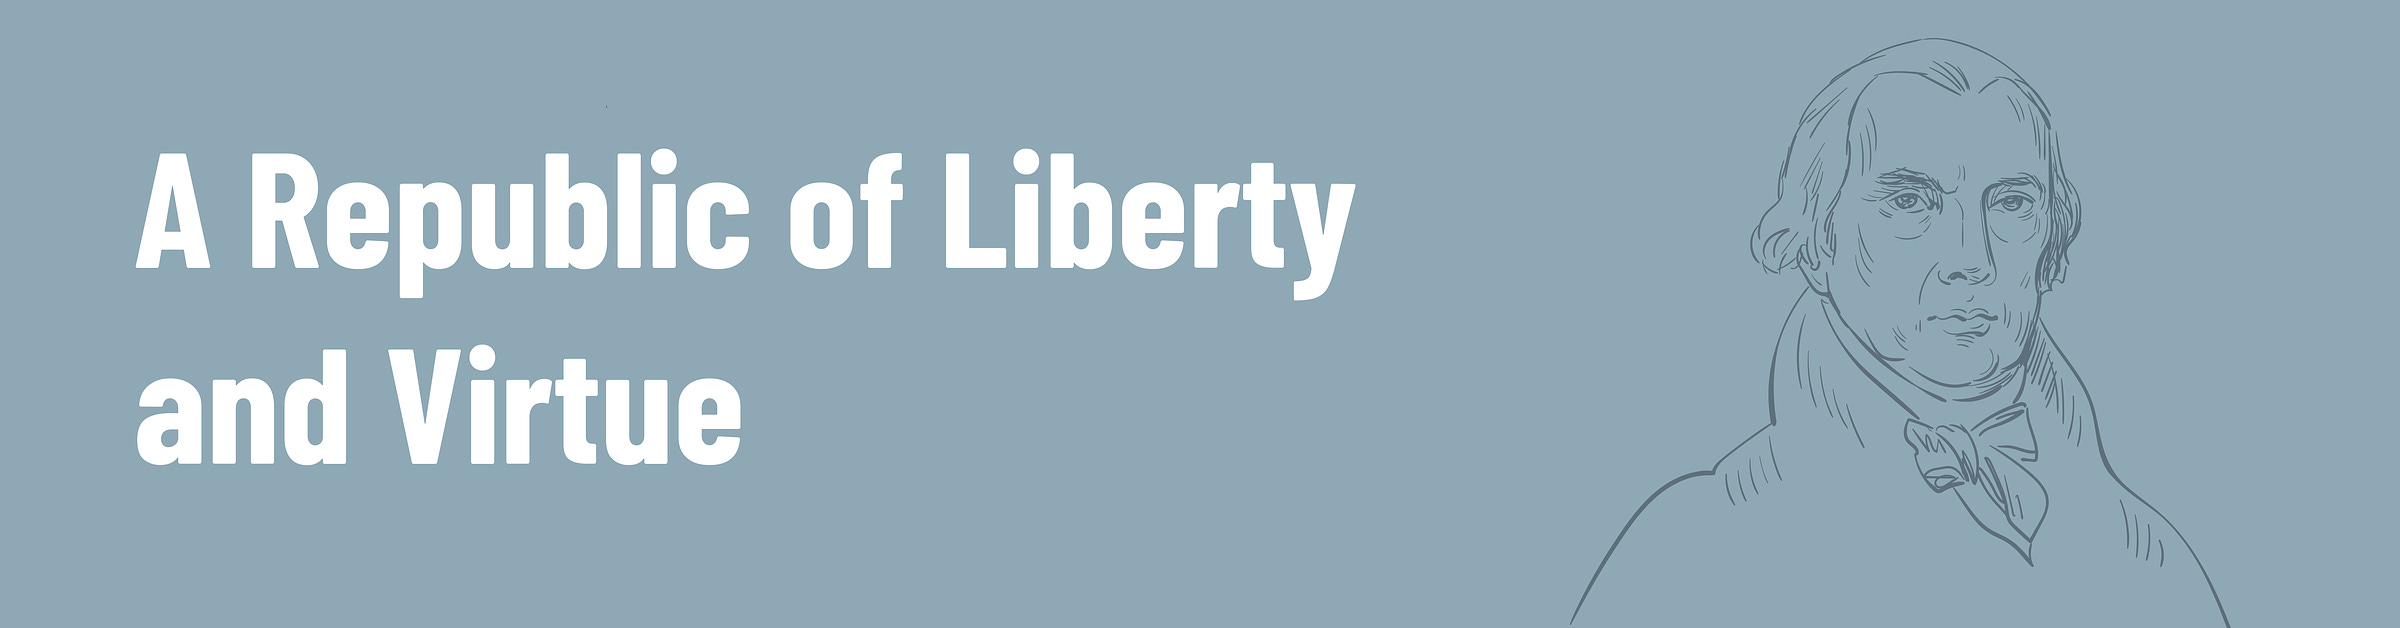 A Republic of Liberty and Virtue